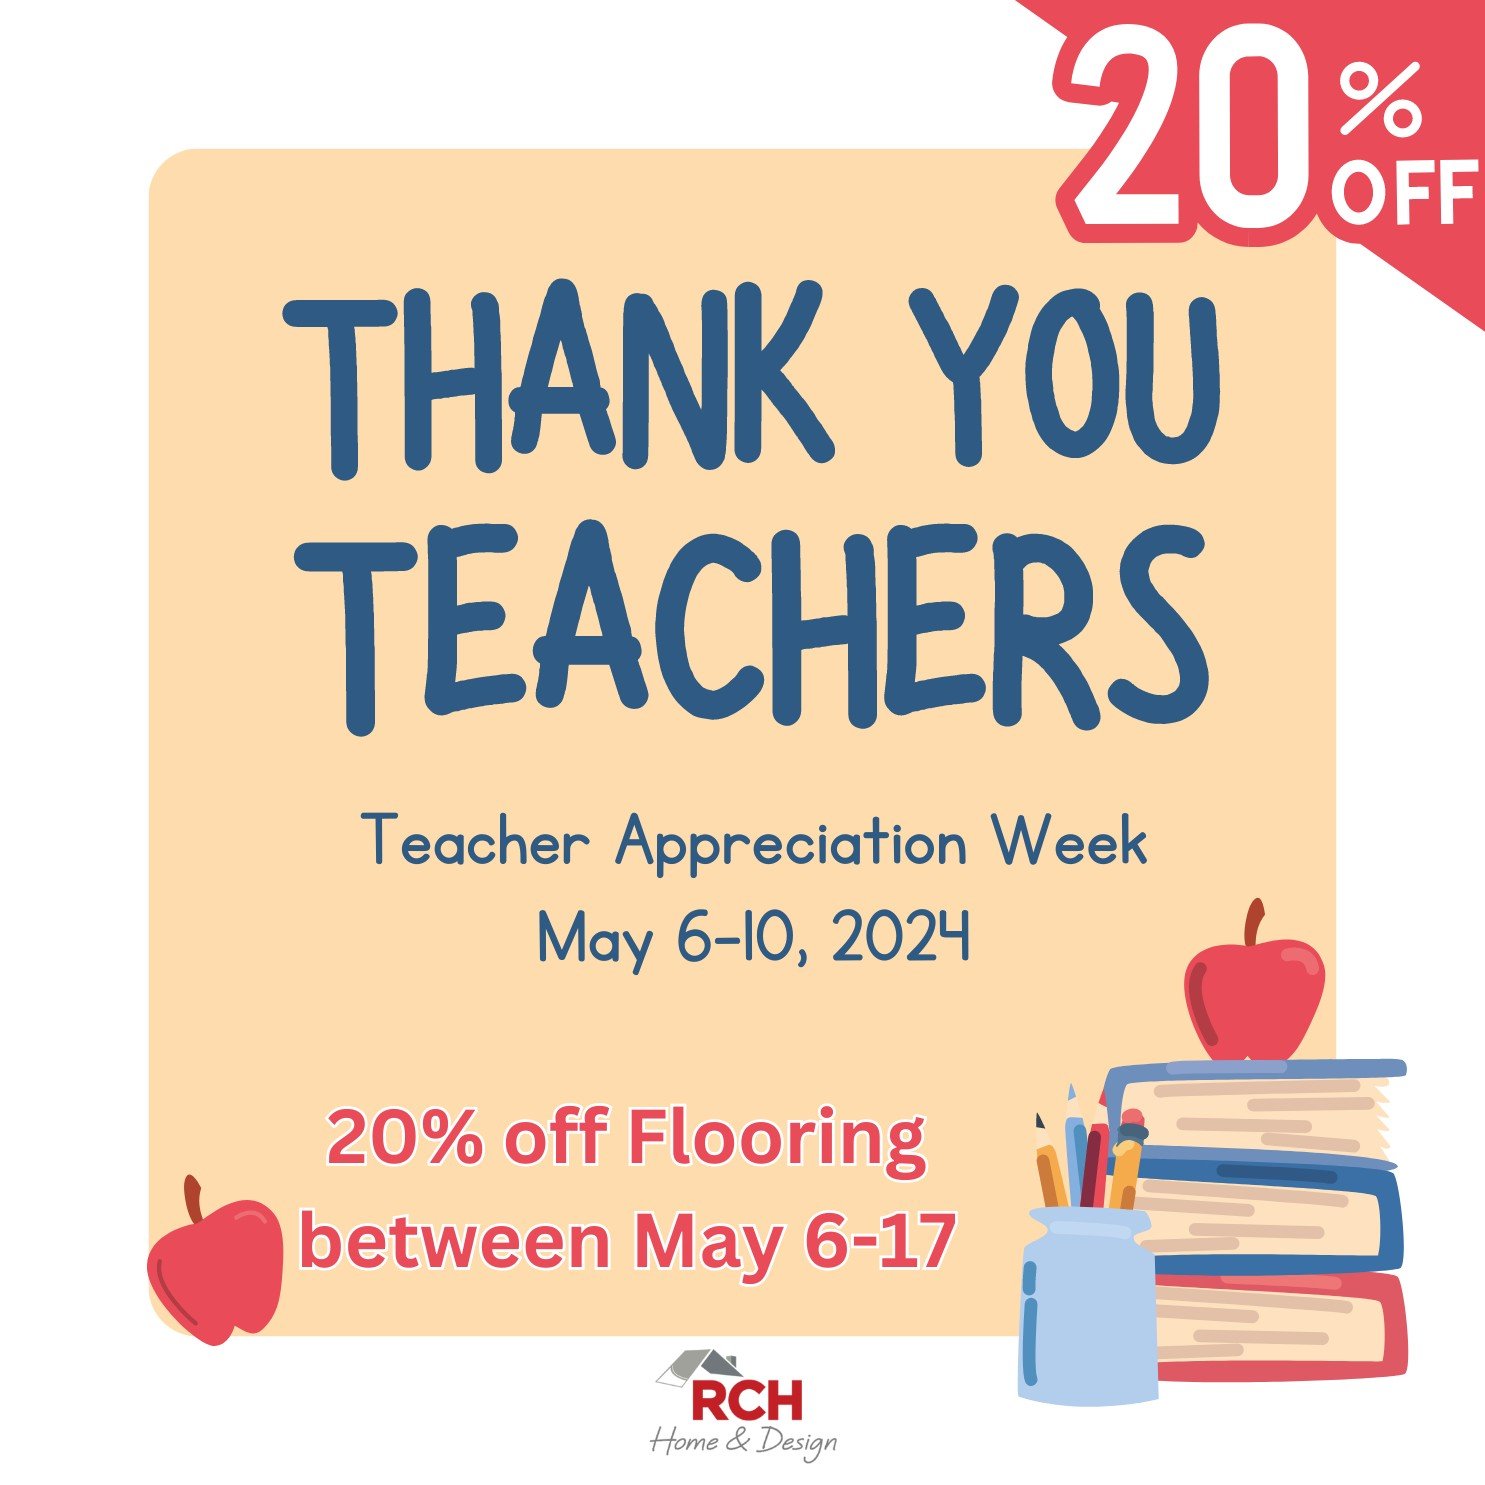 To show our gratitude to 📚TEACHERS📚 as the school year draws to a close and with National Teacher Appreciation Week approaching next week, we are offering a 20% discount on flooring to teachers for the next two weeks. 

Visit our showroom to take a